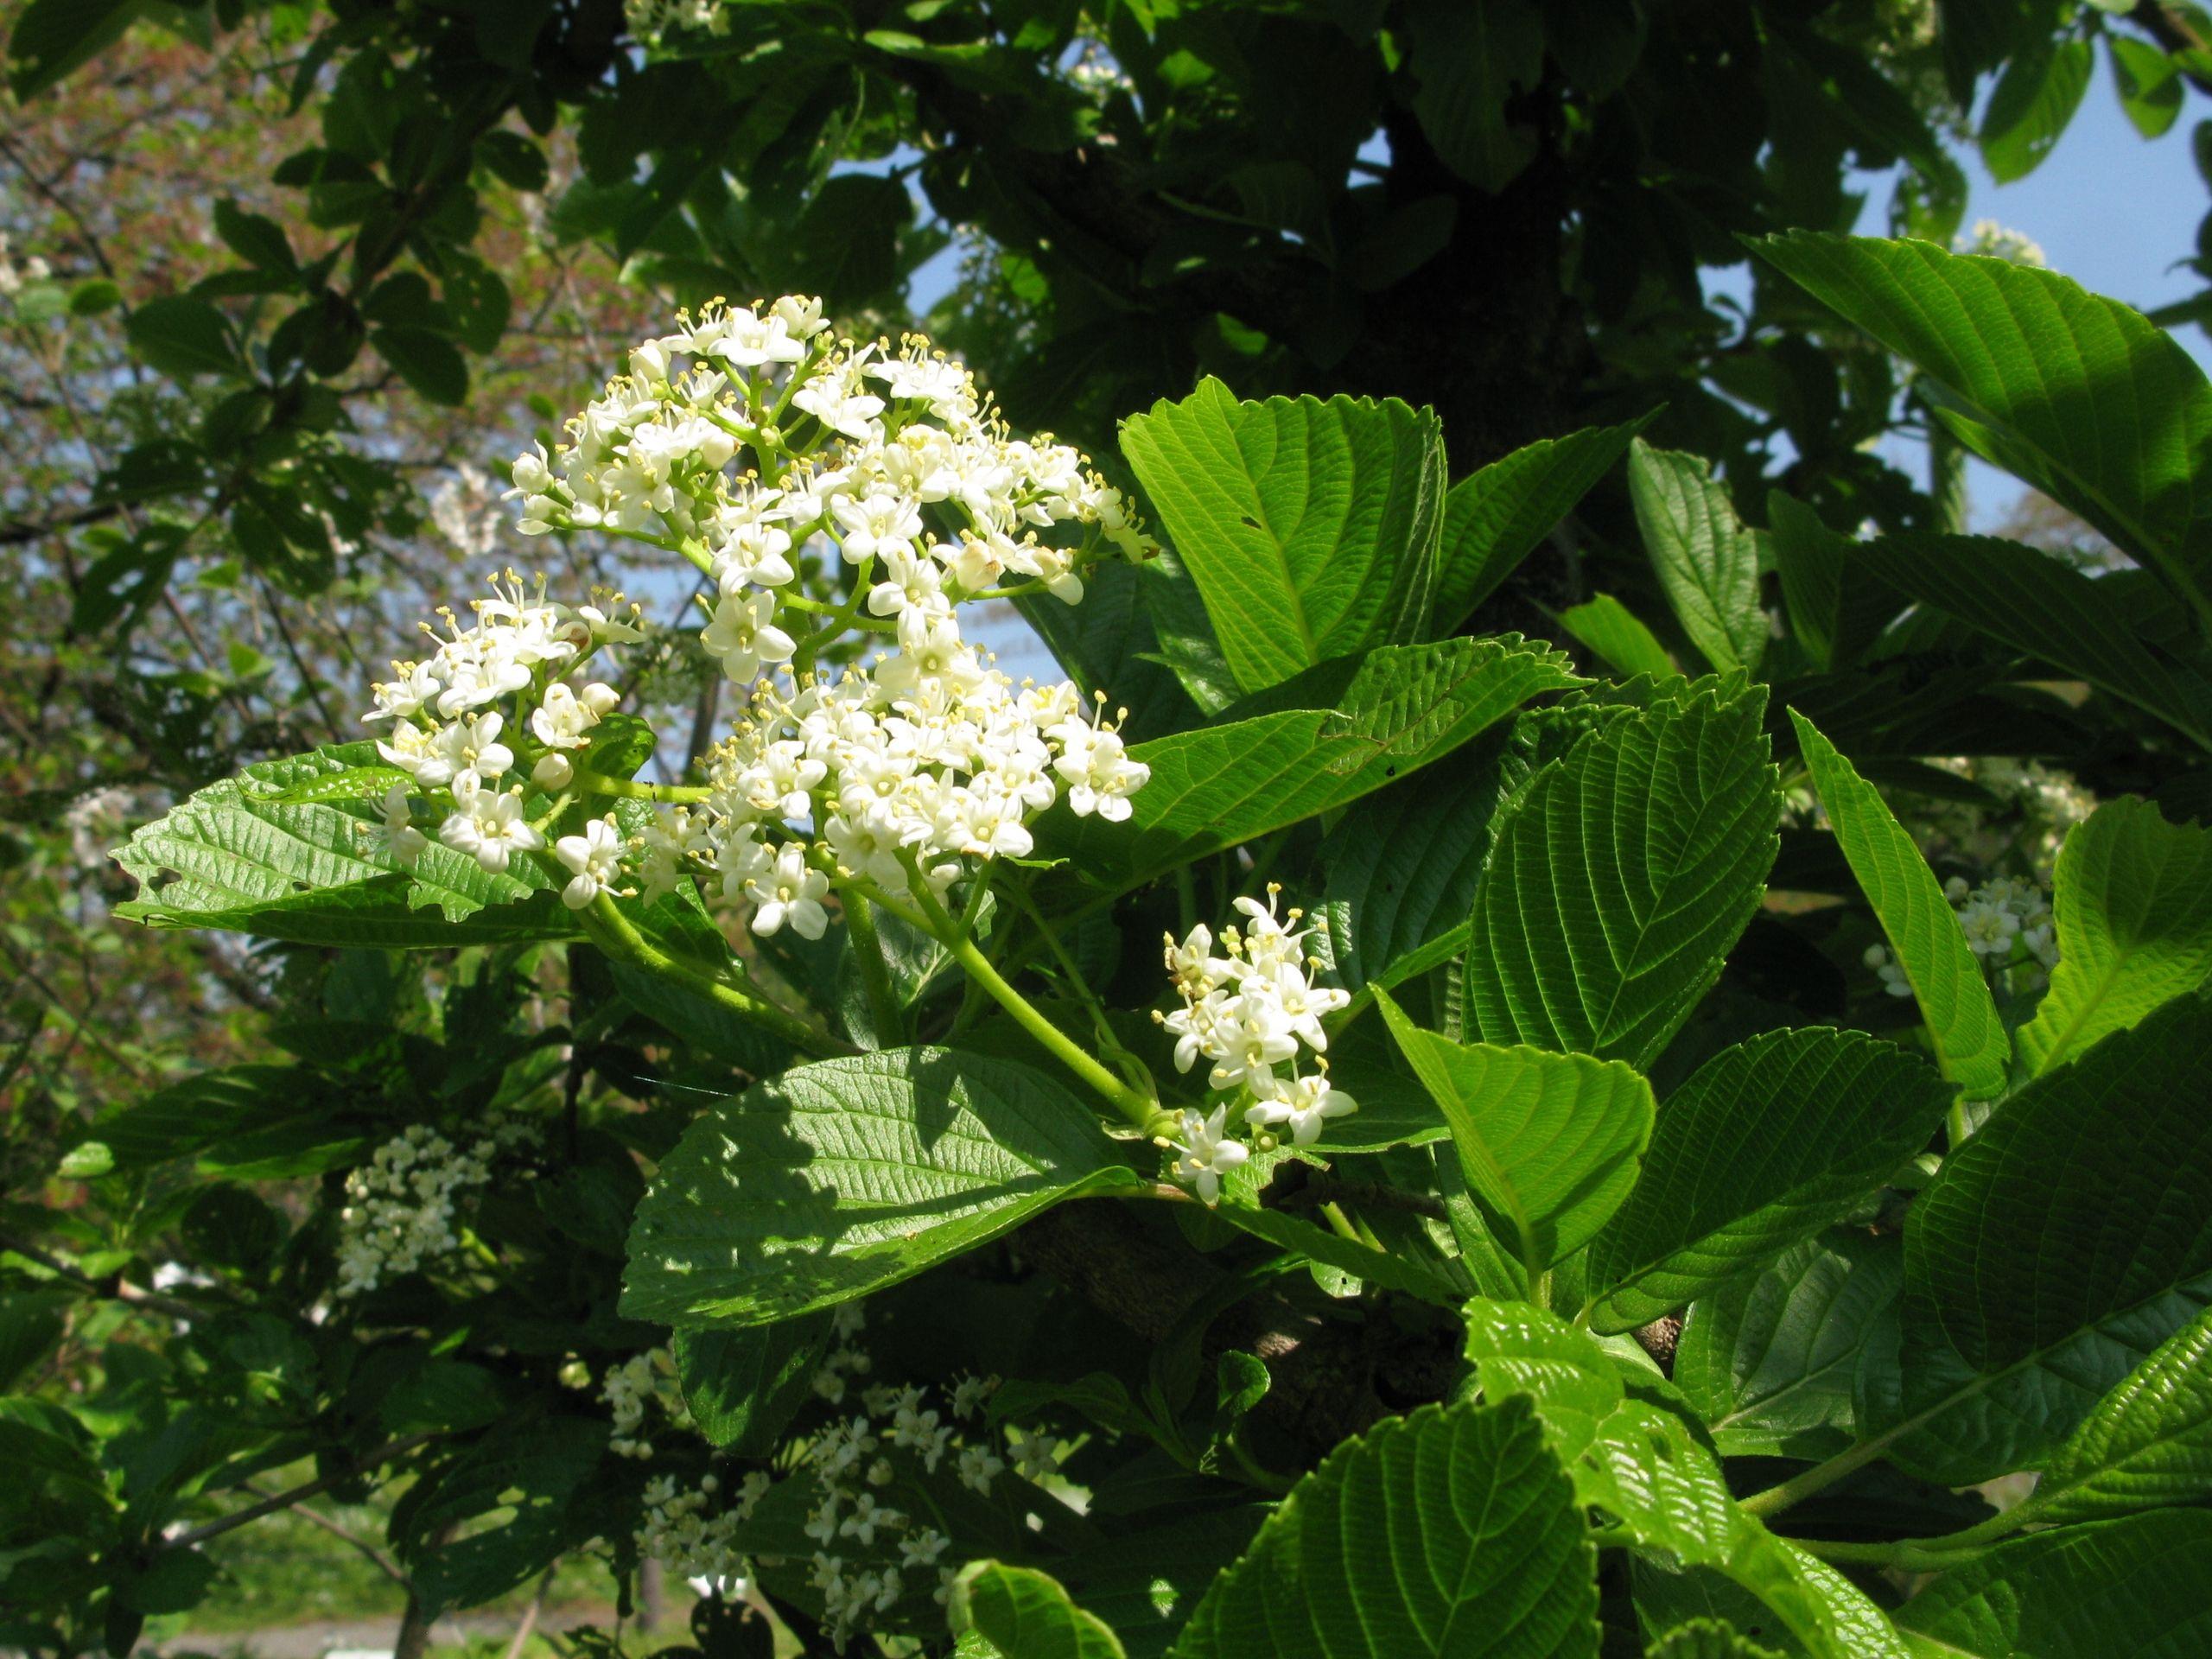 white flowers with yellow anthers, white filaments, lime-green leaves and stems 